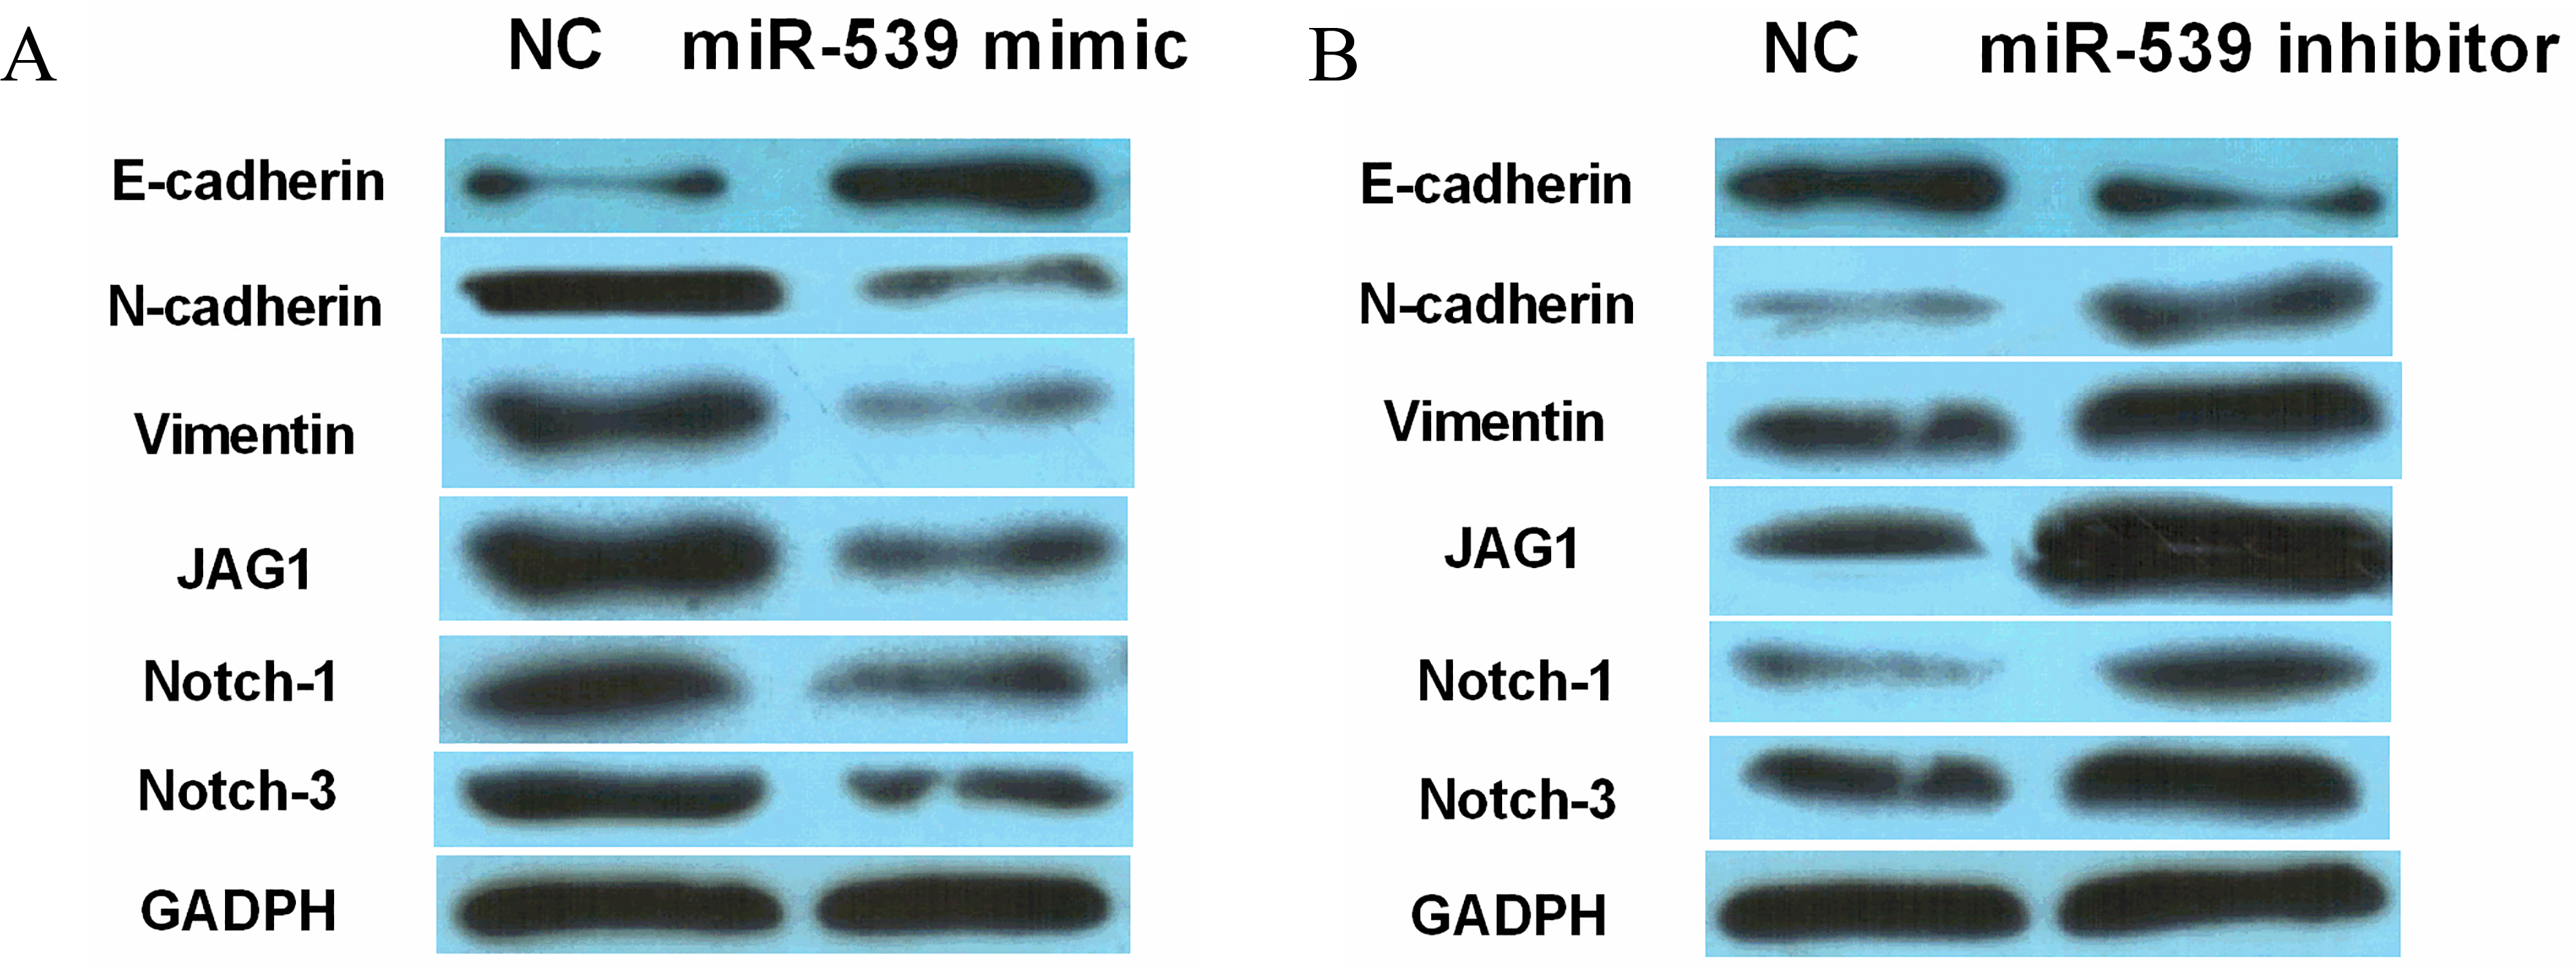 MiR-539 inhibited EMT and Notch1/3 expression in WT. (A, B) The protein expression of E-cadherin, N-cadherin, Vimentin, Notch-1 and Notch-3 in SK-NEP-1 cells contained miR-539 mimics or inhibitor.